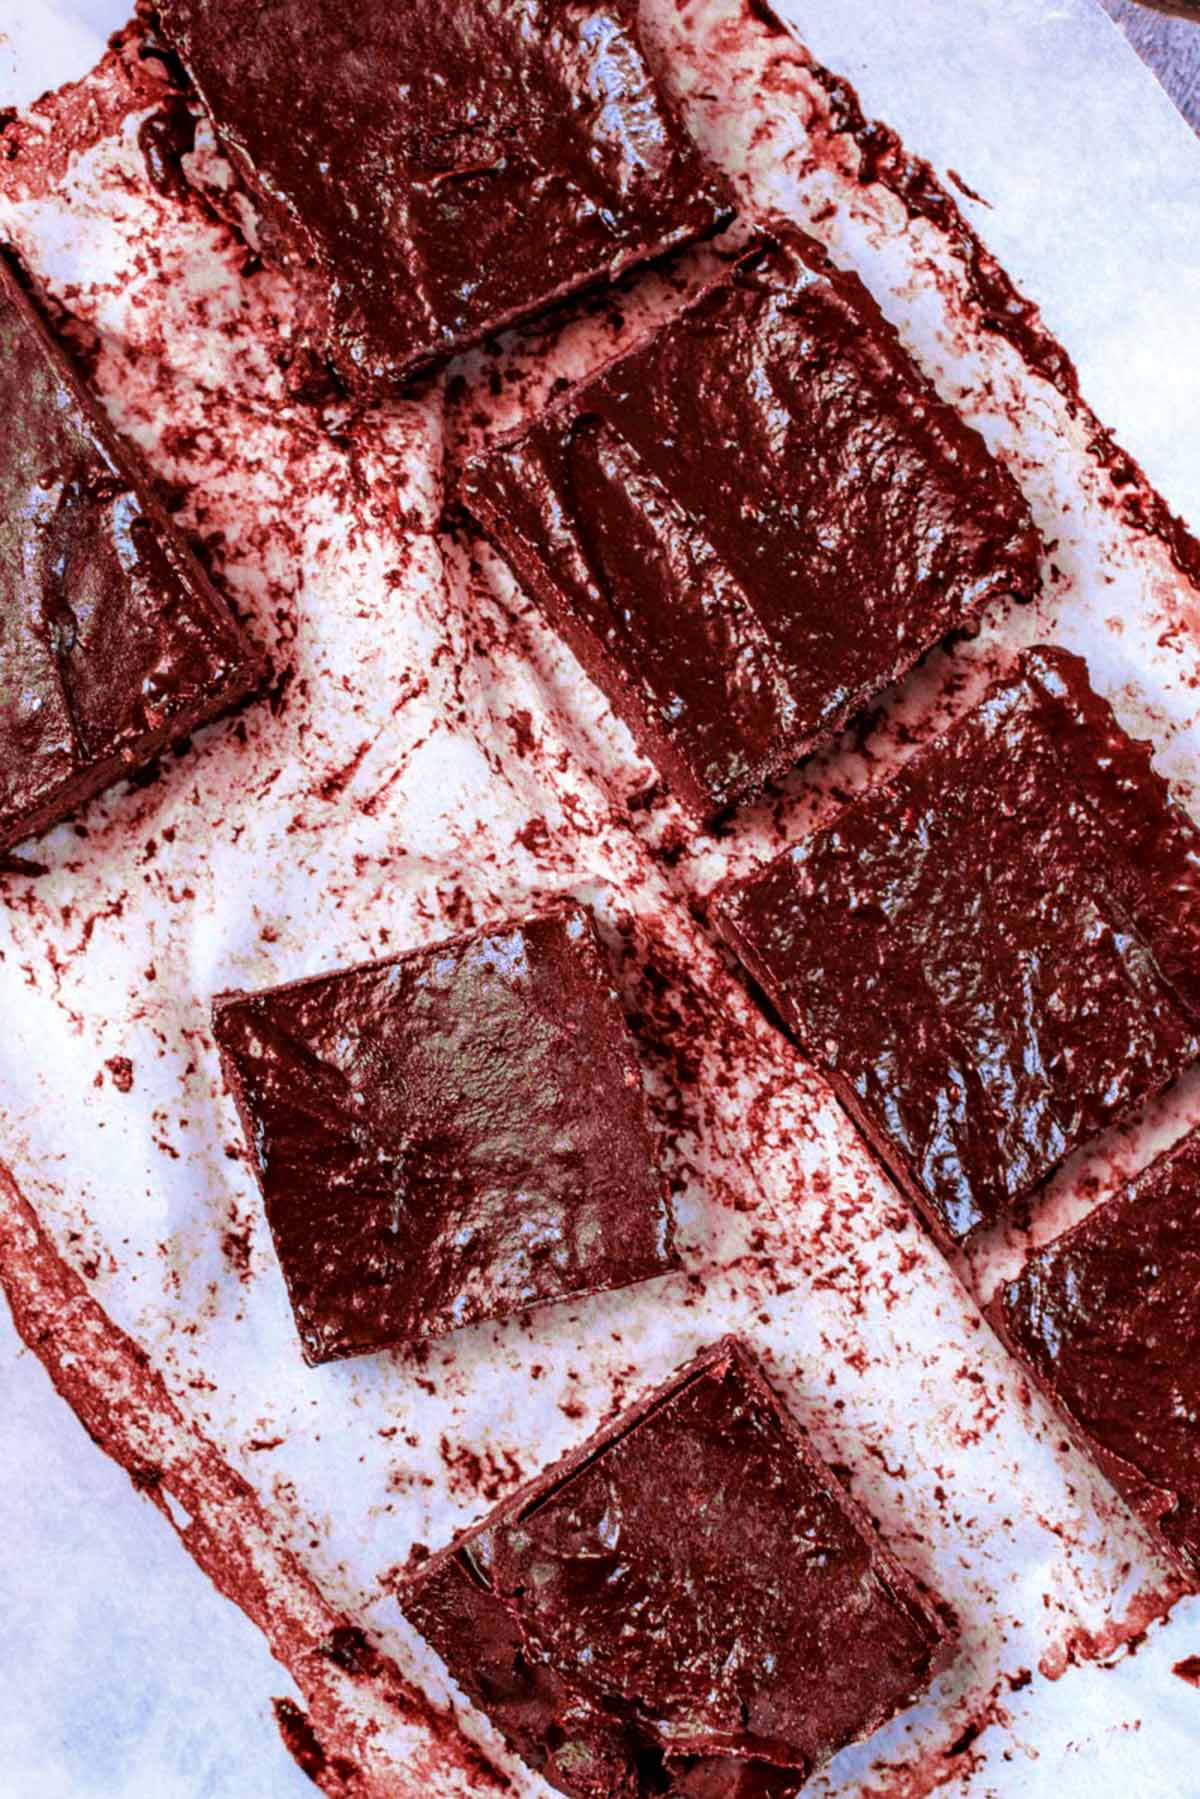 Chocolate brownies cut into squares on a sheet of baking paper.